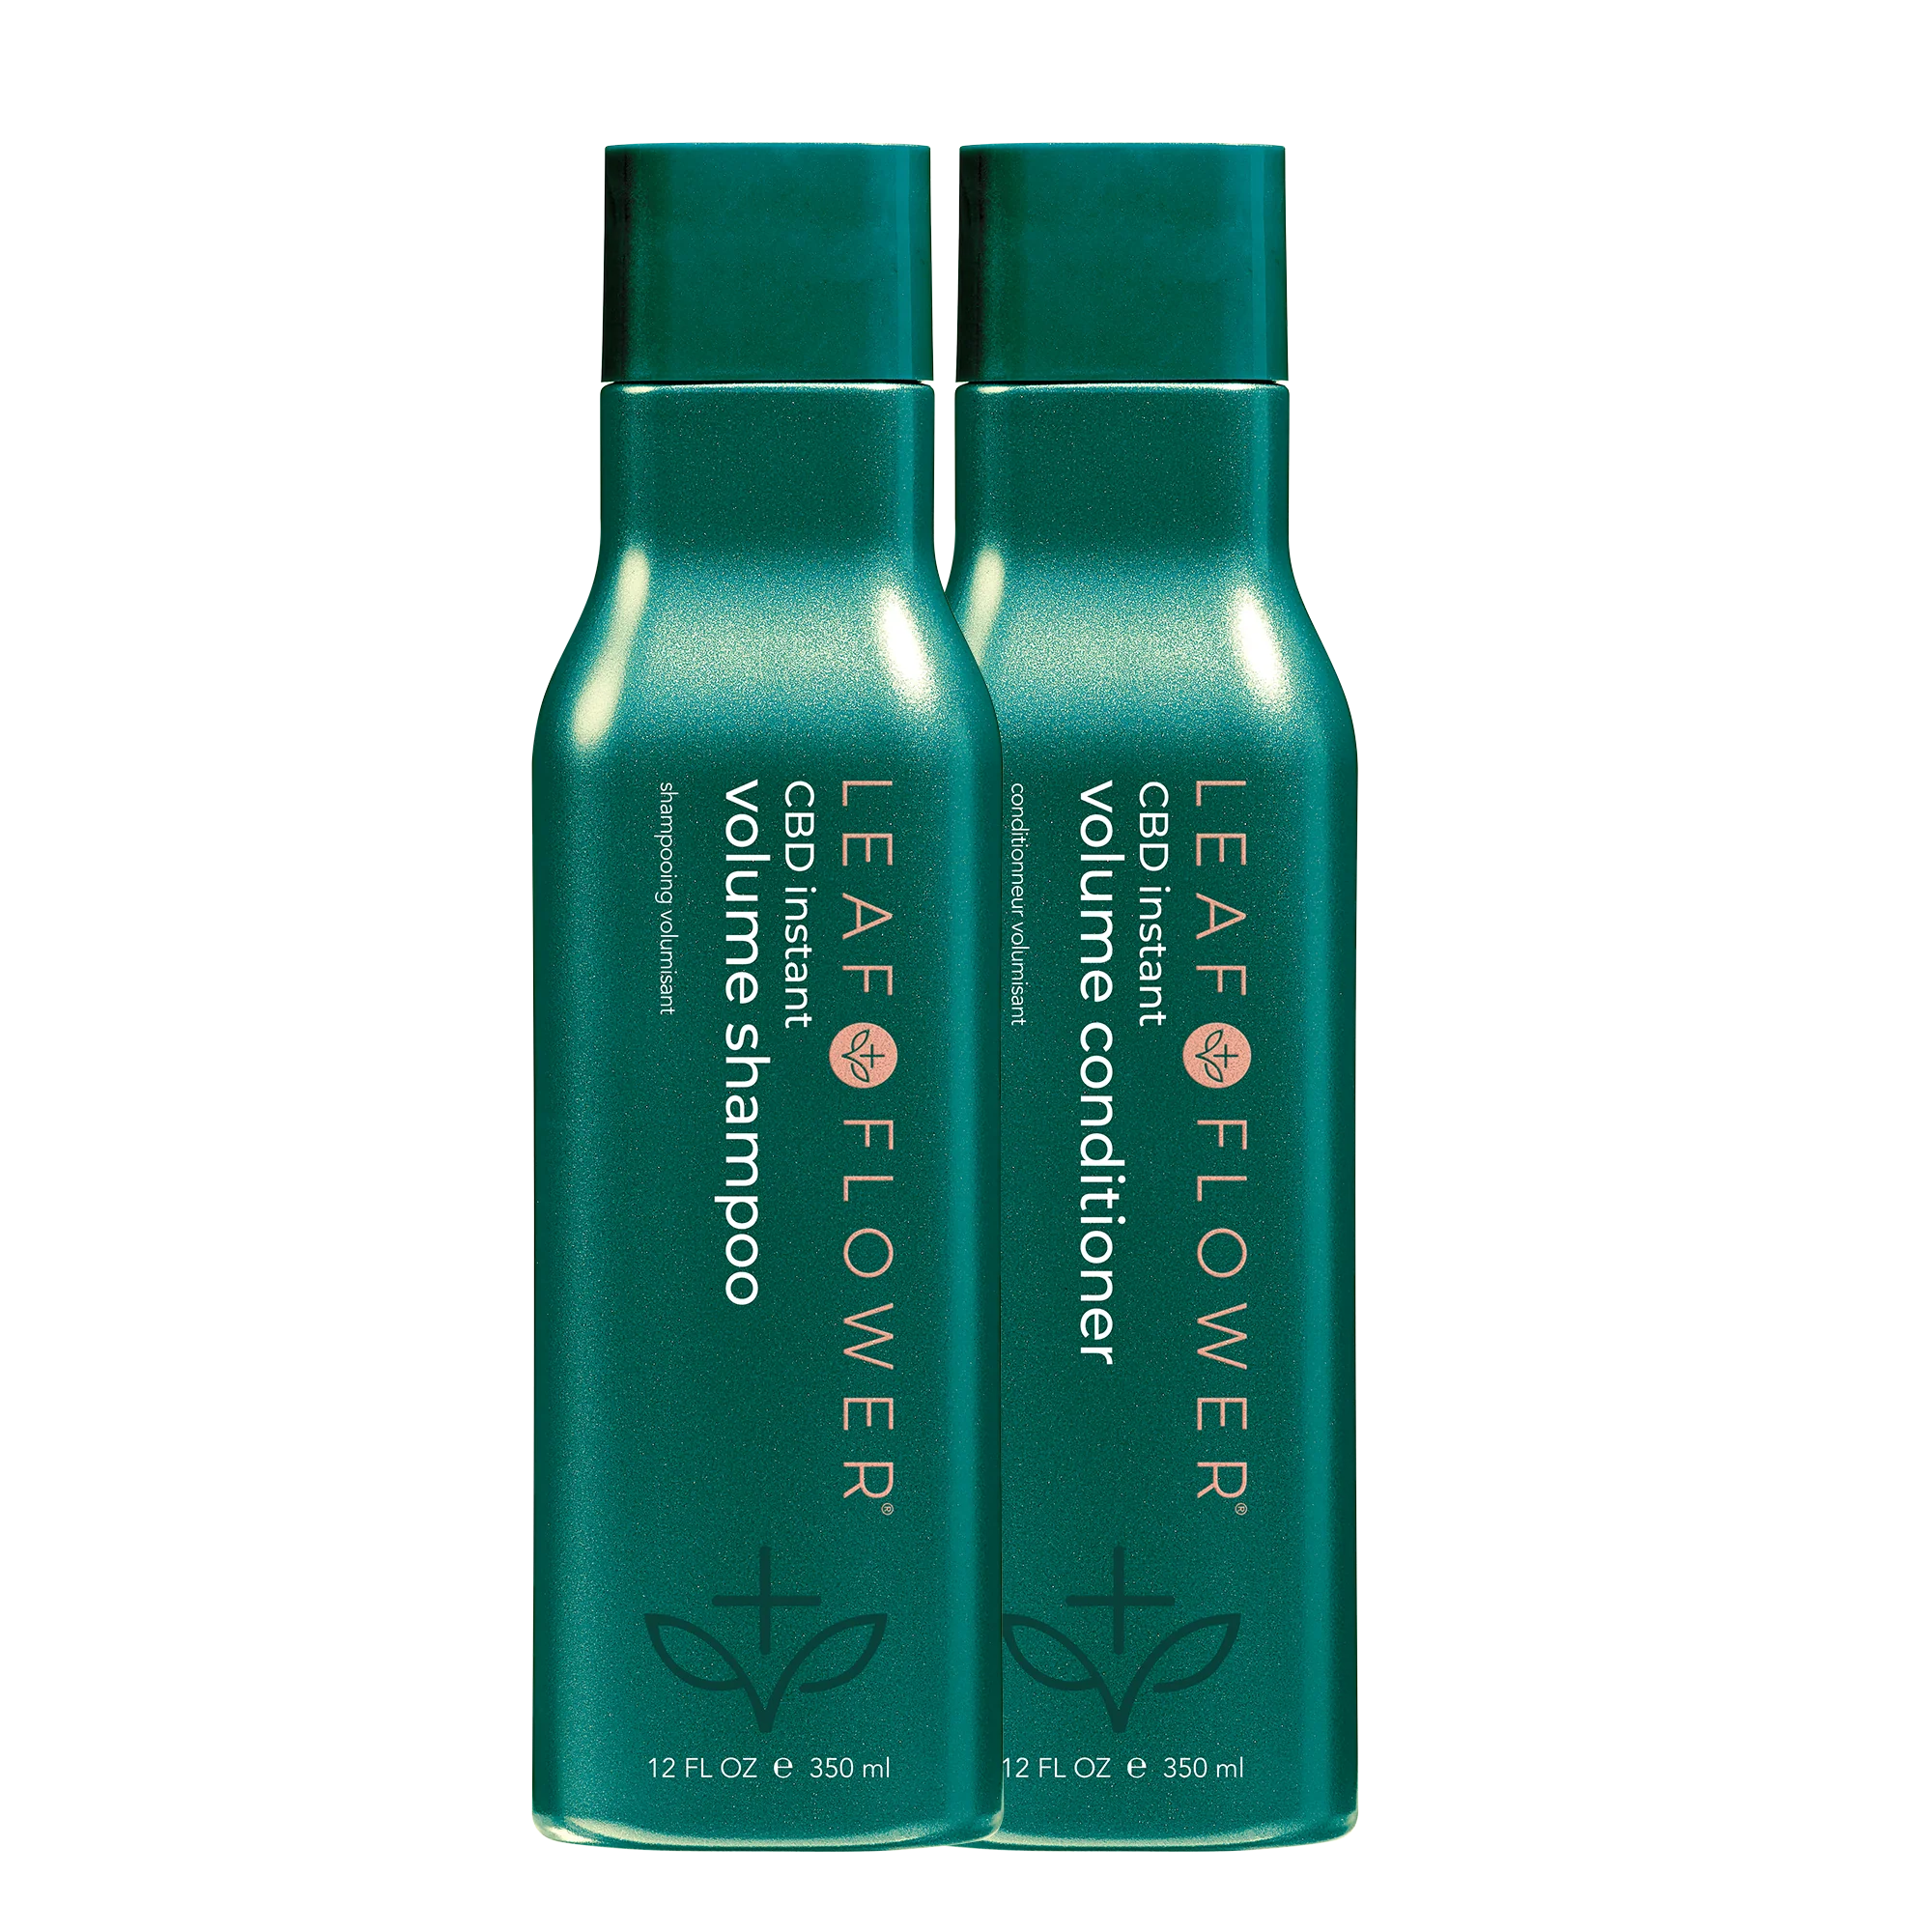 LEAF and FLOWER Instant Volume Shampoo and Conditioner Duo a Shampoo & Conditioner Sets